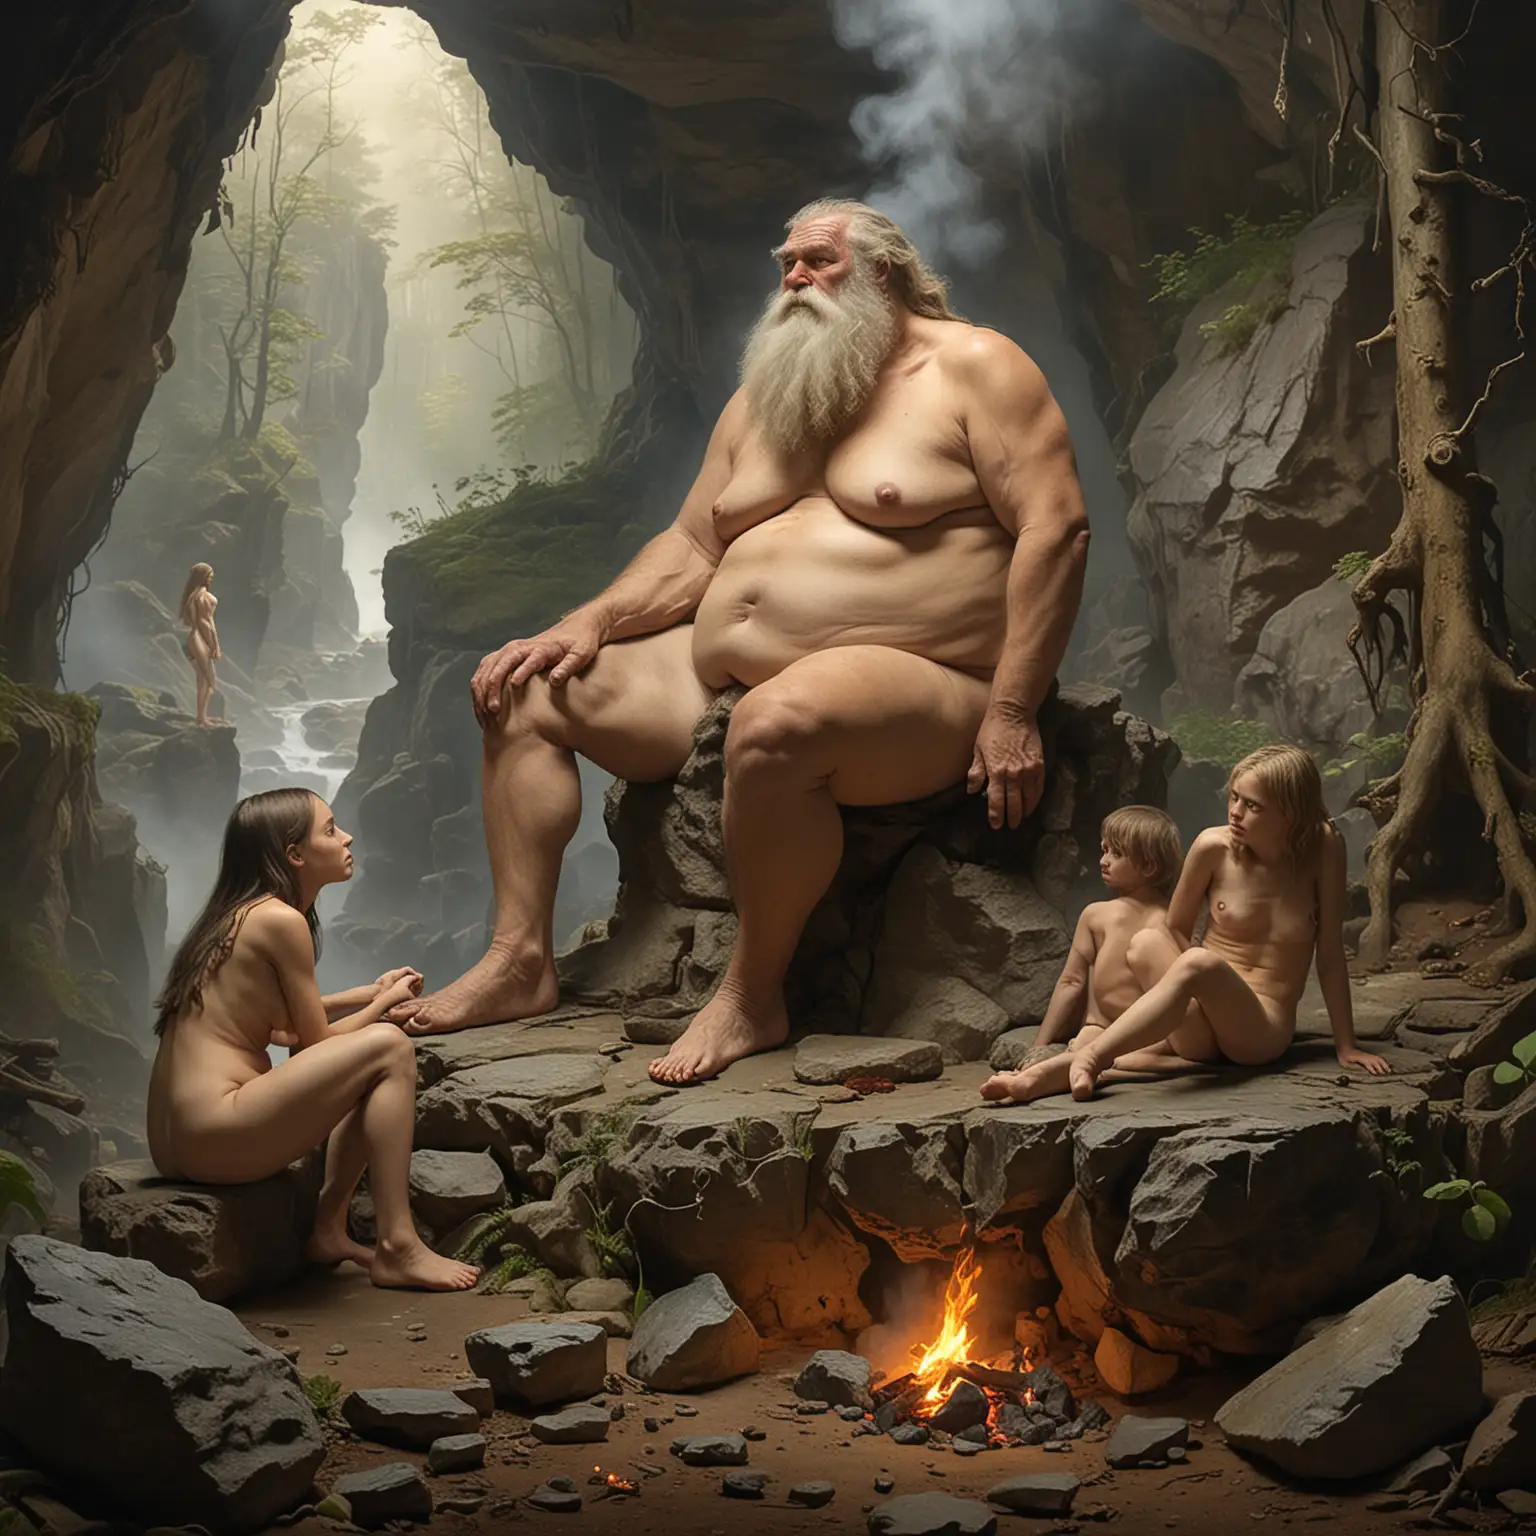 one very large male Hill giant, forest cave, cooking fire, large feet, large hand, nude, Burley, fat, primitive, hairy, long beard, old age, sitting on rock, misty, with two young nude standing human females who are smaller than a quarter of his size 